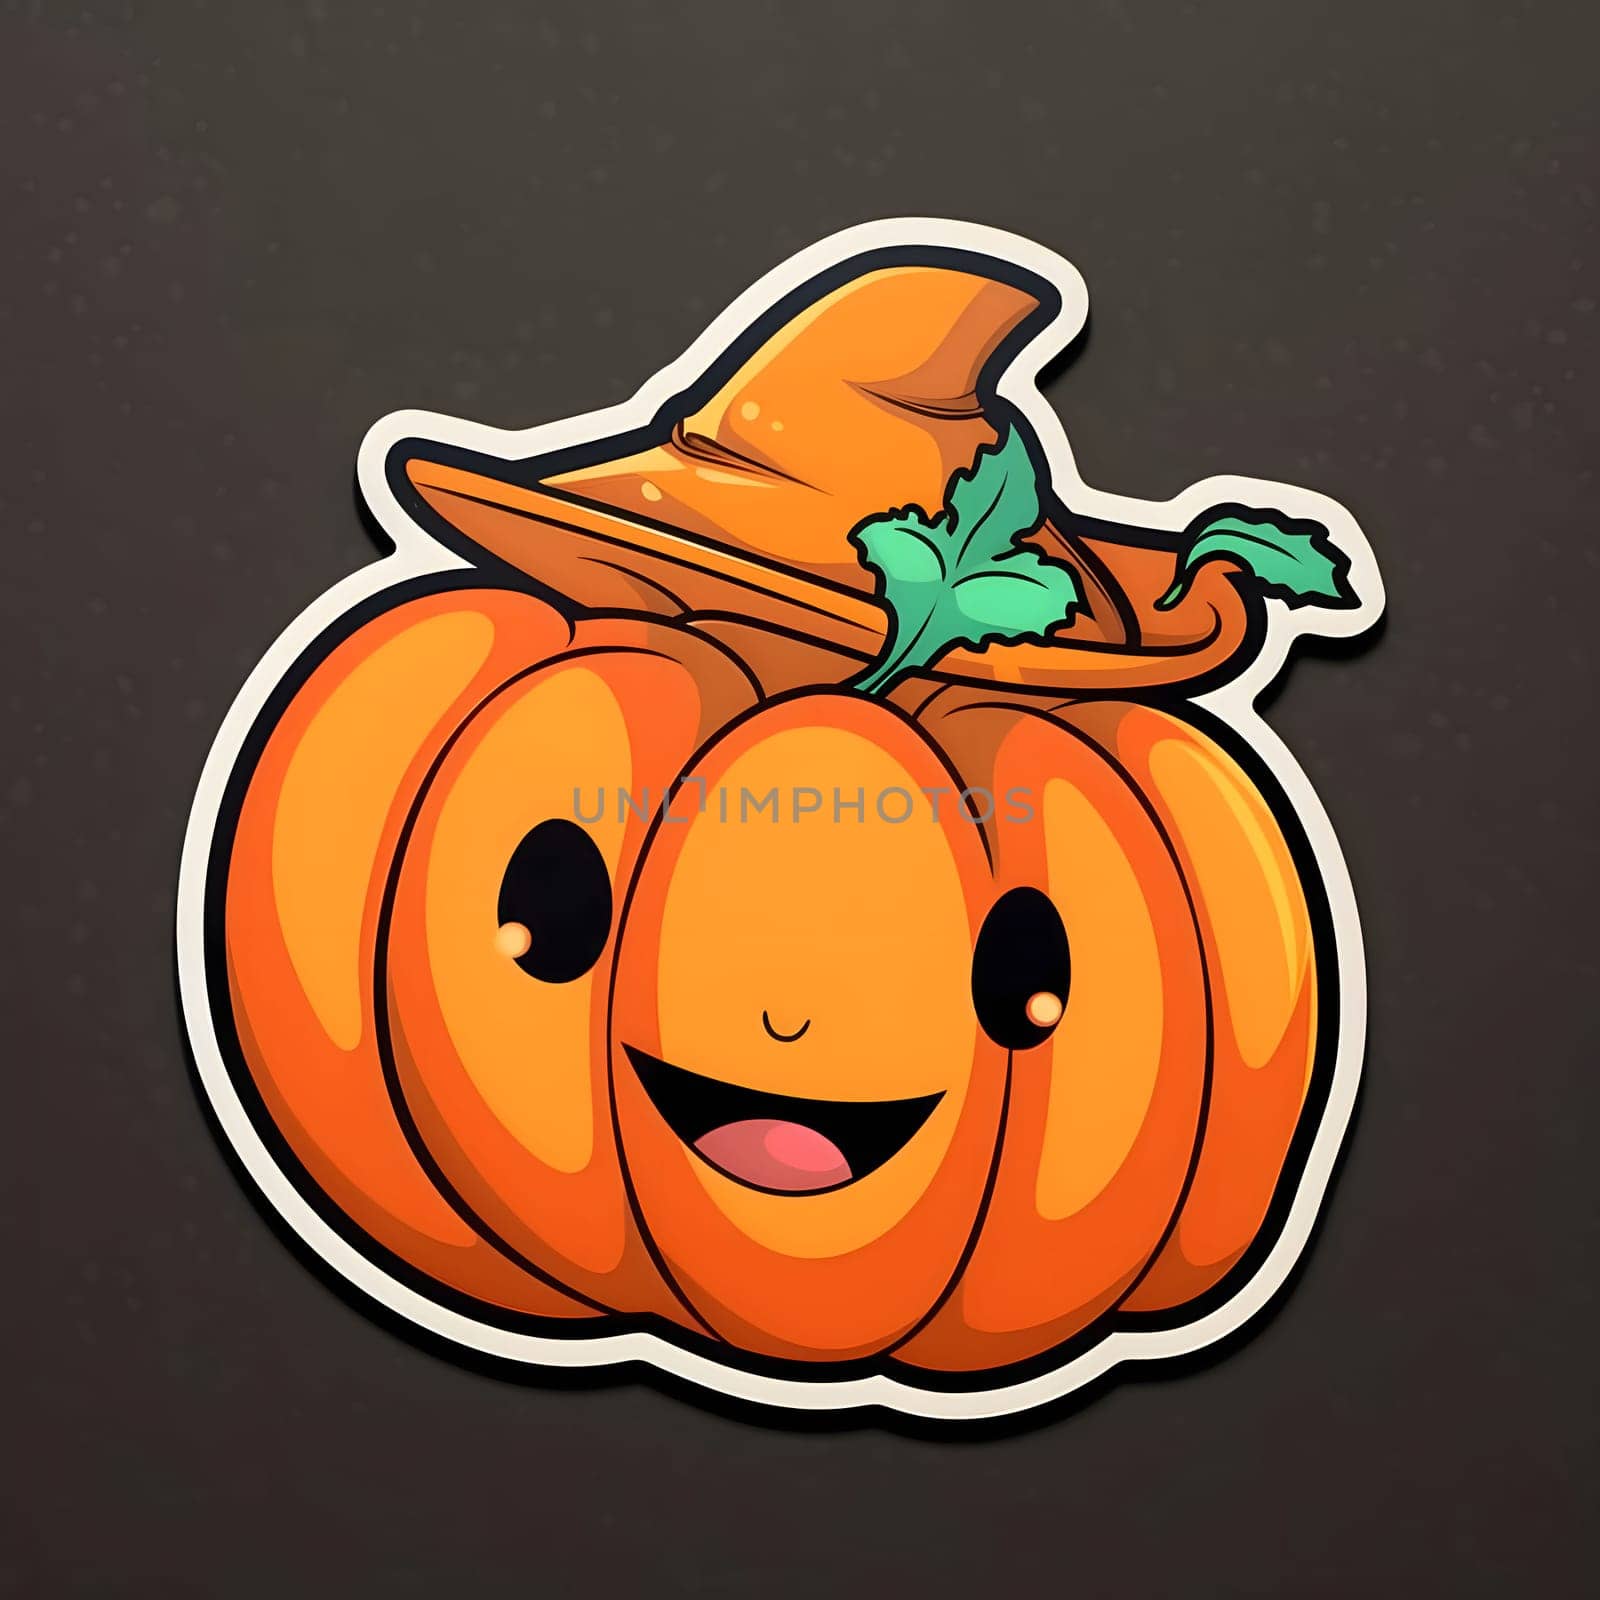 Sticker happy smiling jack-o-lantern pumpkin with hat, Halloween image on a dark isolated background. by ThemesS